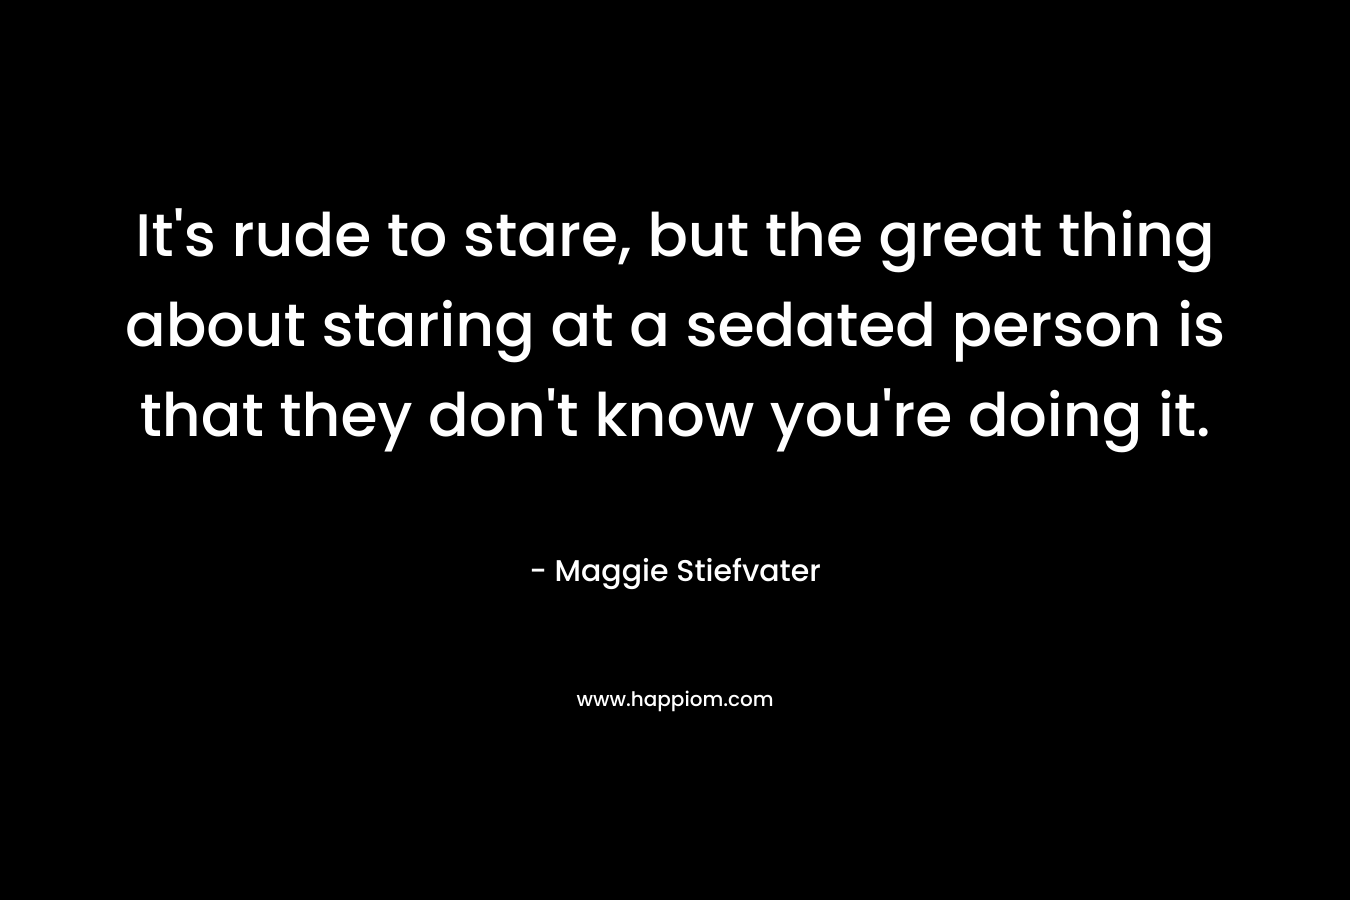 It's rude to stare, but the great thing about staring at a sedated person is that they don't know you're doing it.